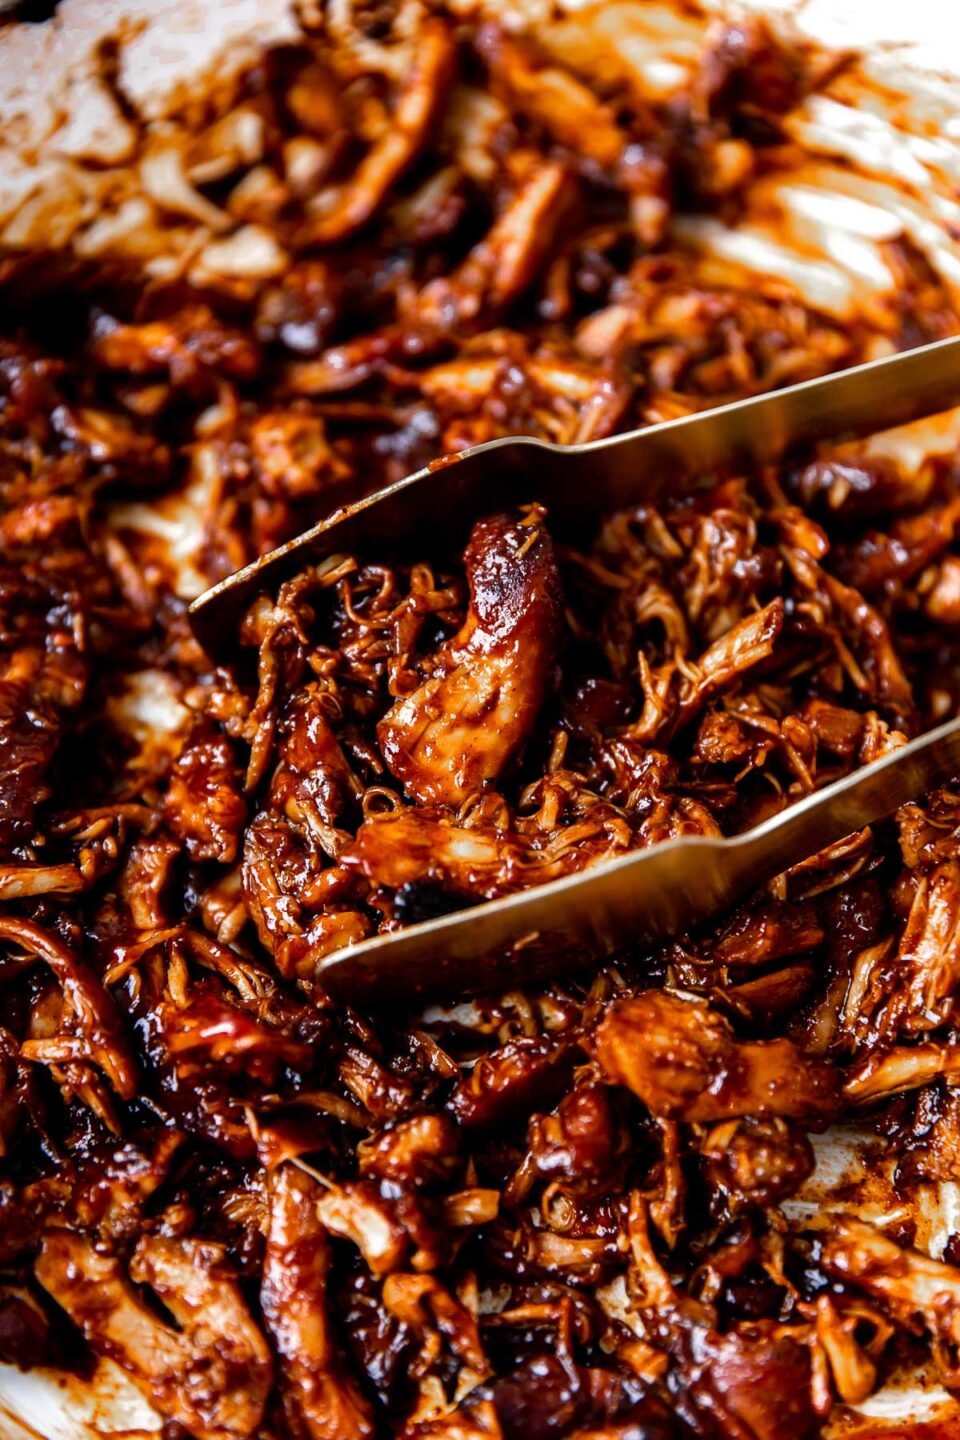 A close up and side angle shot of BBQ shredded chicken inside of a white braiser. A pair of gold tongs rest inside of the pan being used to grab a serving of the BBQ chicken.